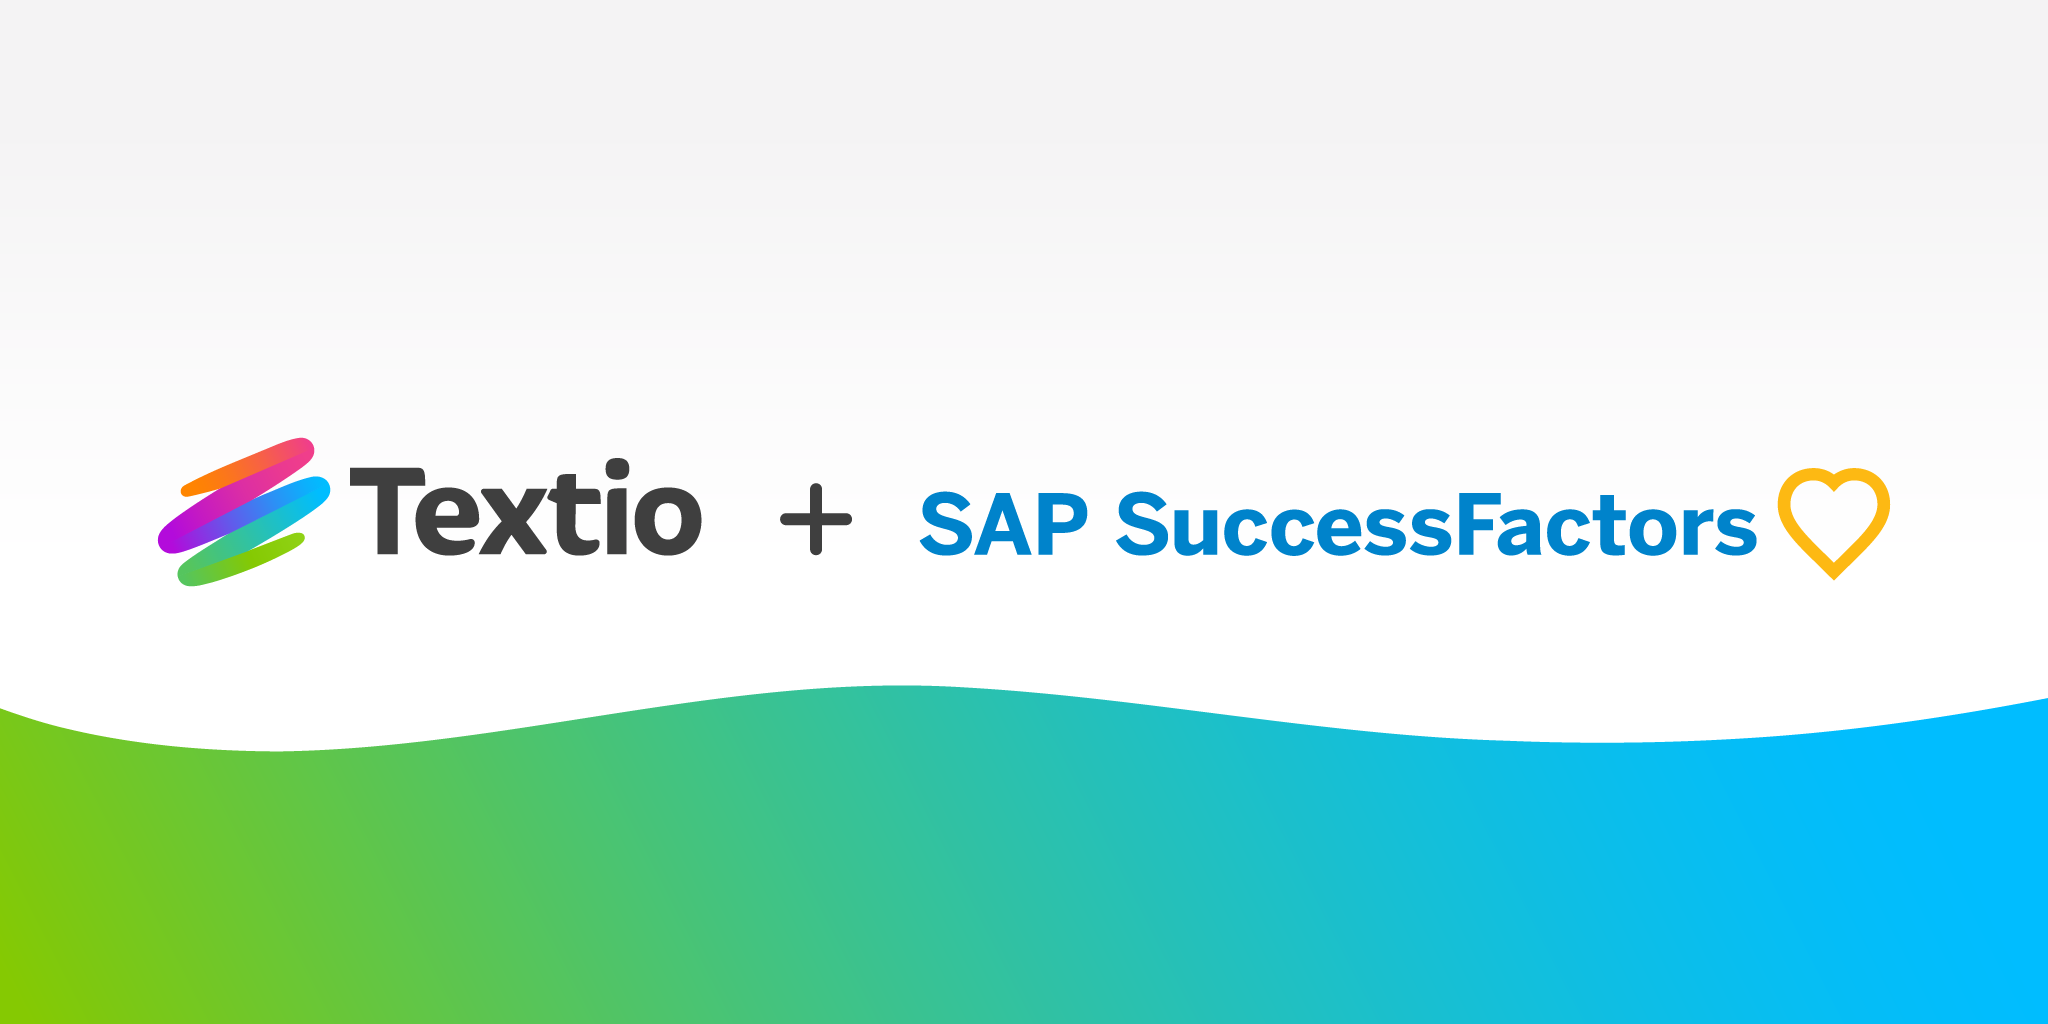 Textio Lift integrates with SAP SuccessFactors for writing performance feedback